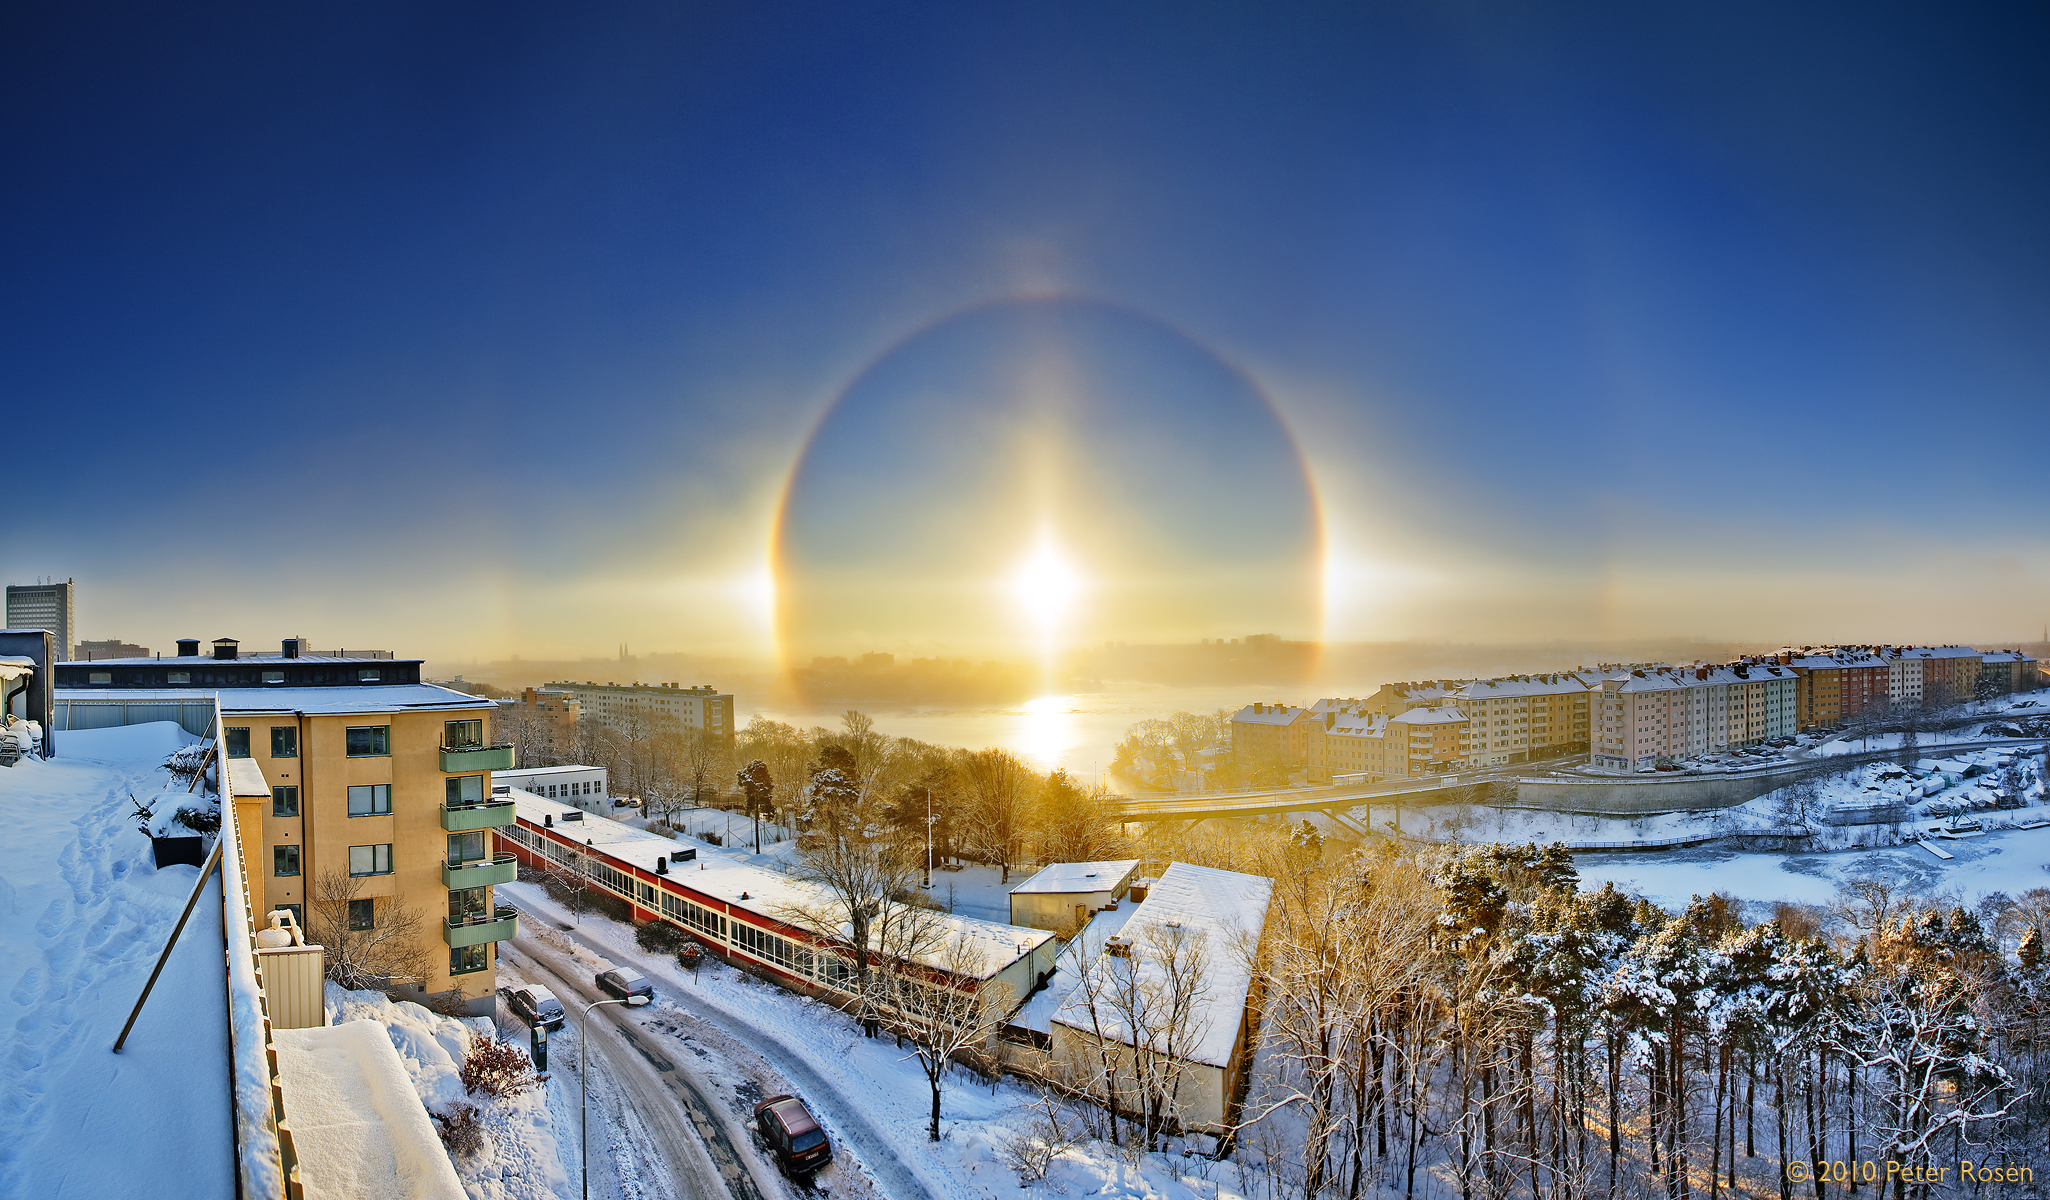 This sun halo image was taken in Stockholm, Sweden HD Wallpaper